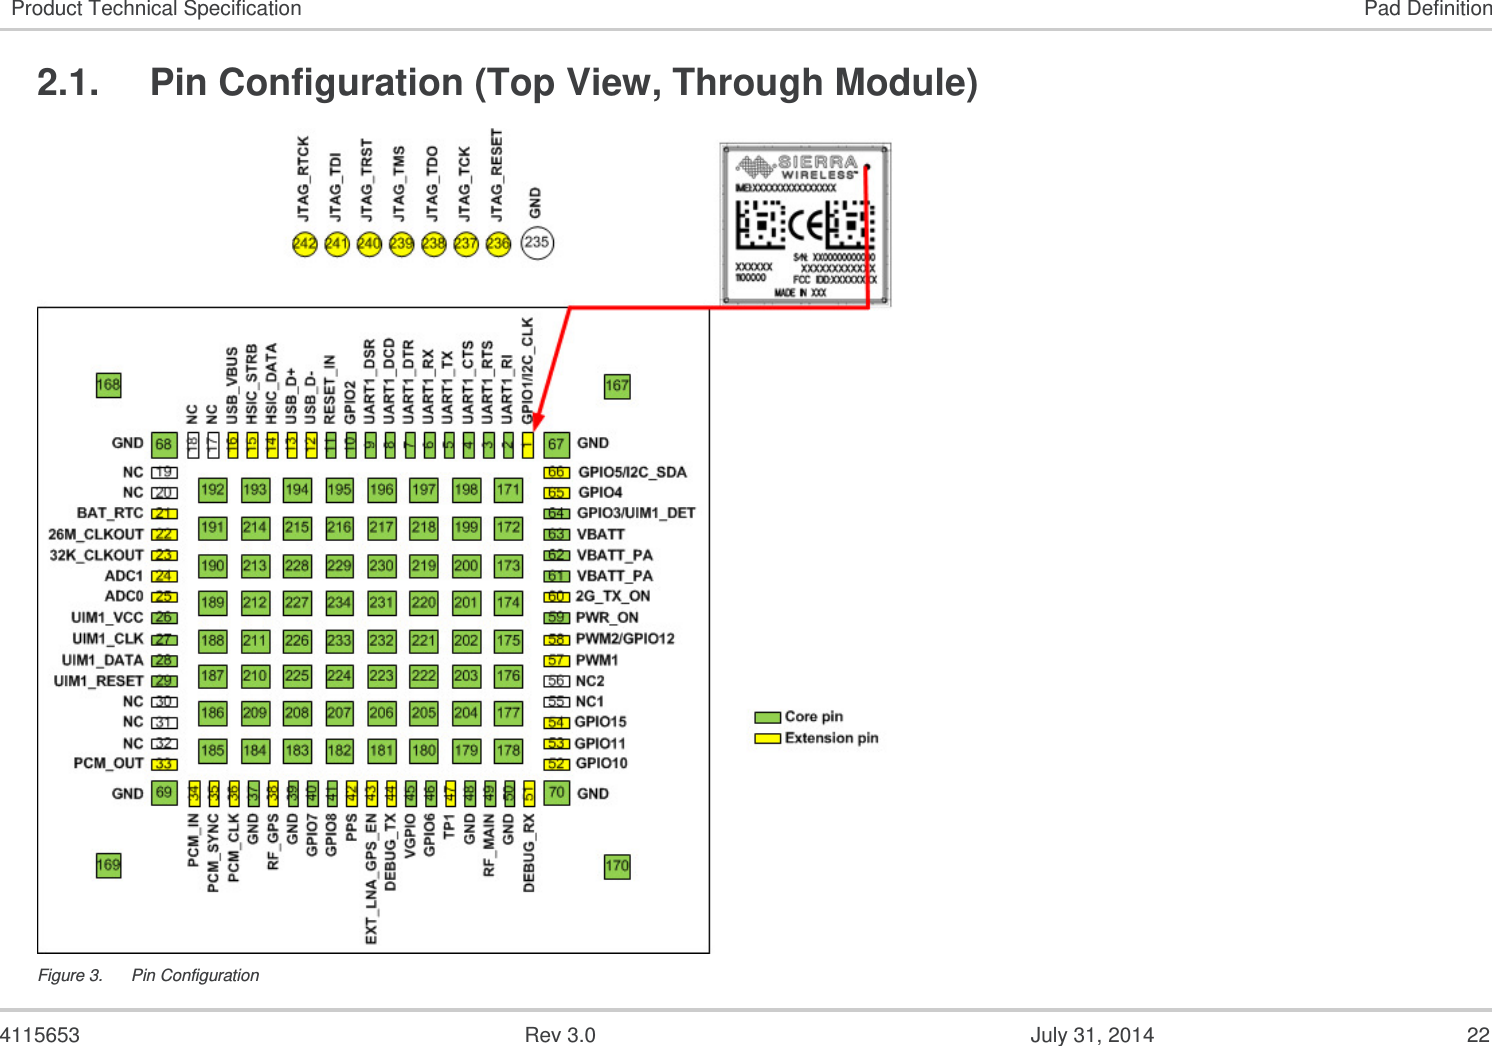   4115653  Rev 3.0  July 31, 2014  22 Product Technical Specification Pad Definition 2.1.  Pin Configuration (Top View, Through Module)  Figure 3.  Pin Configuration